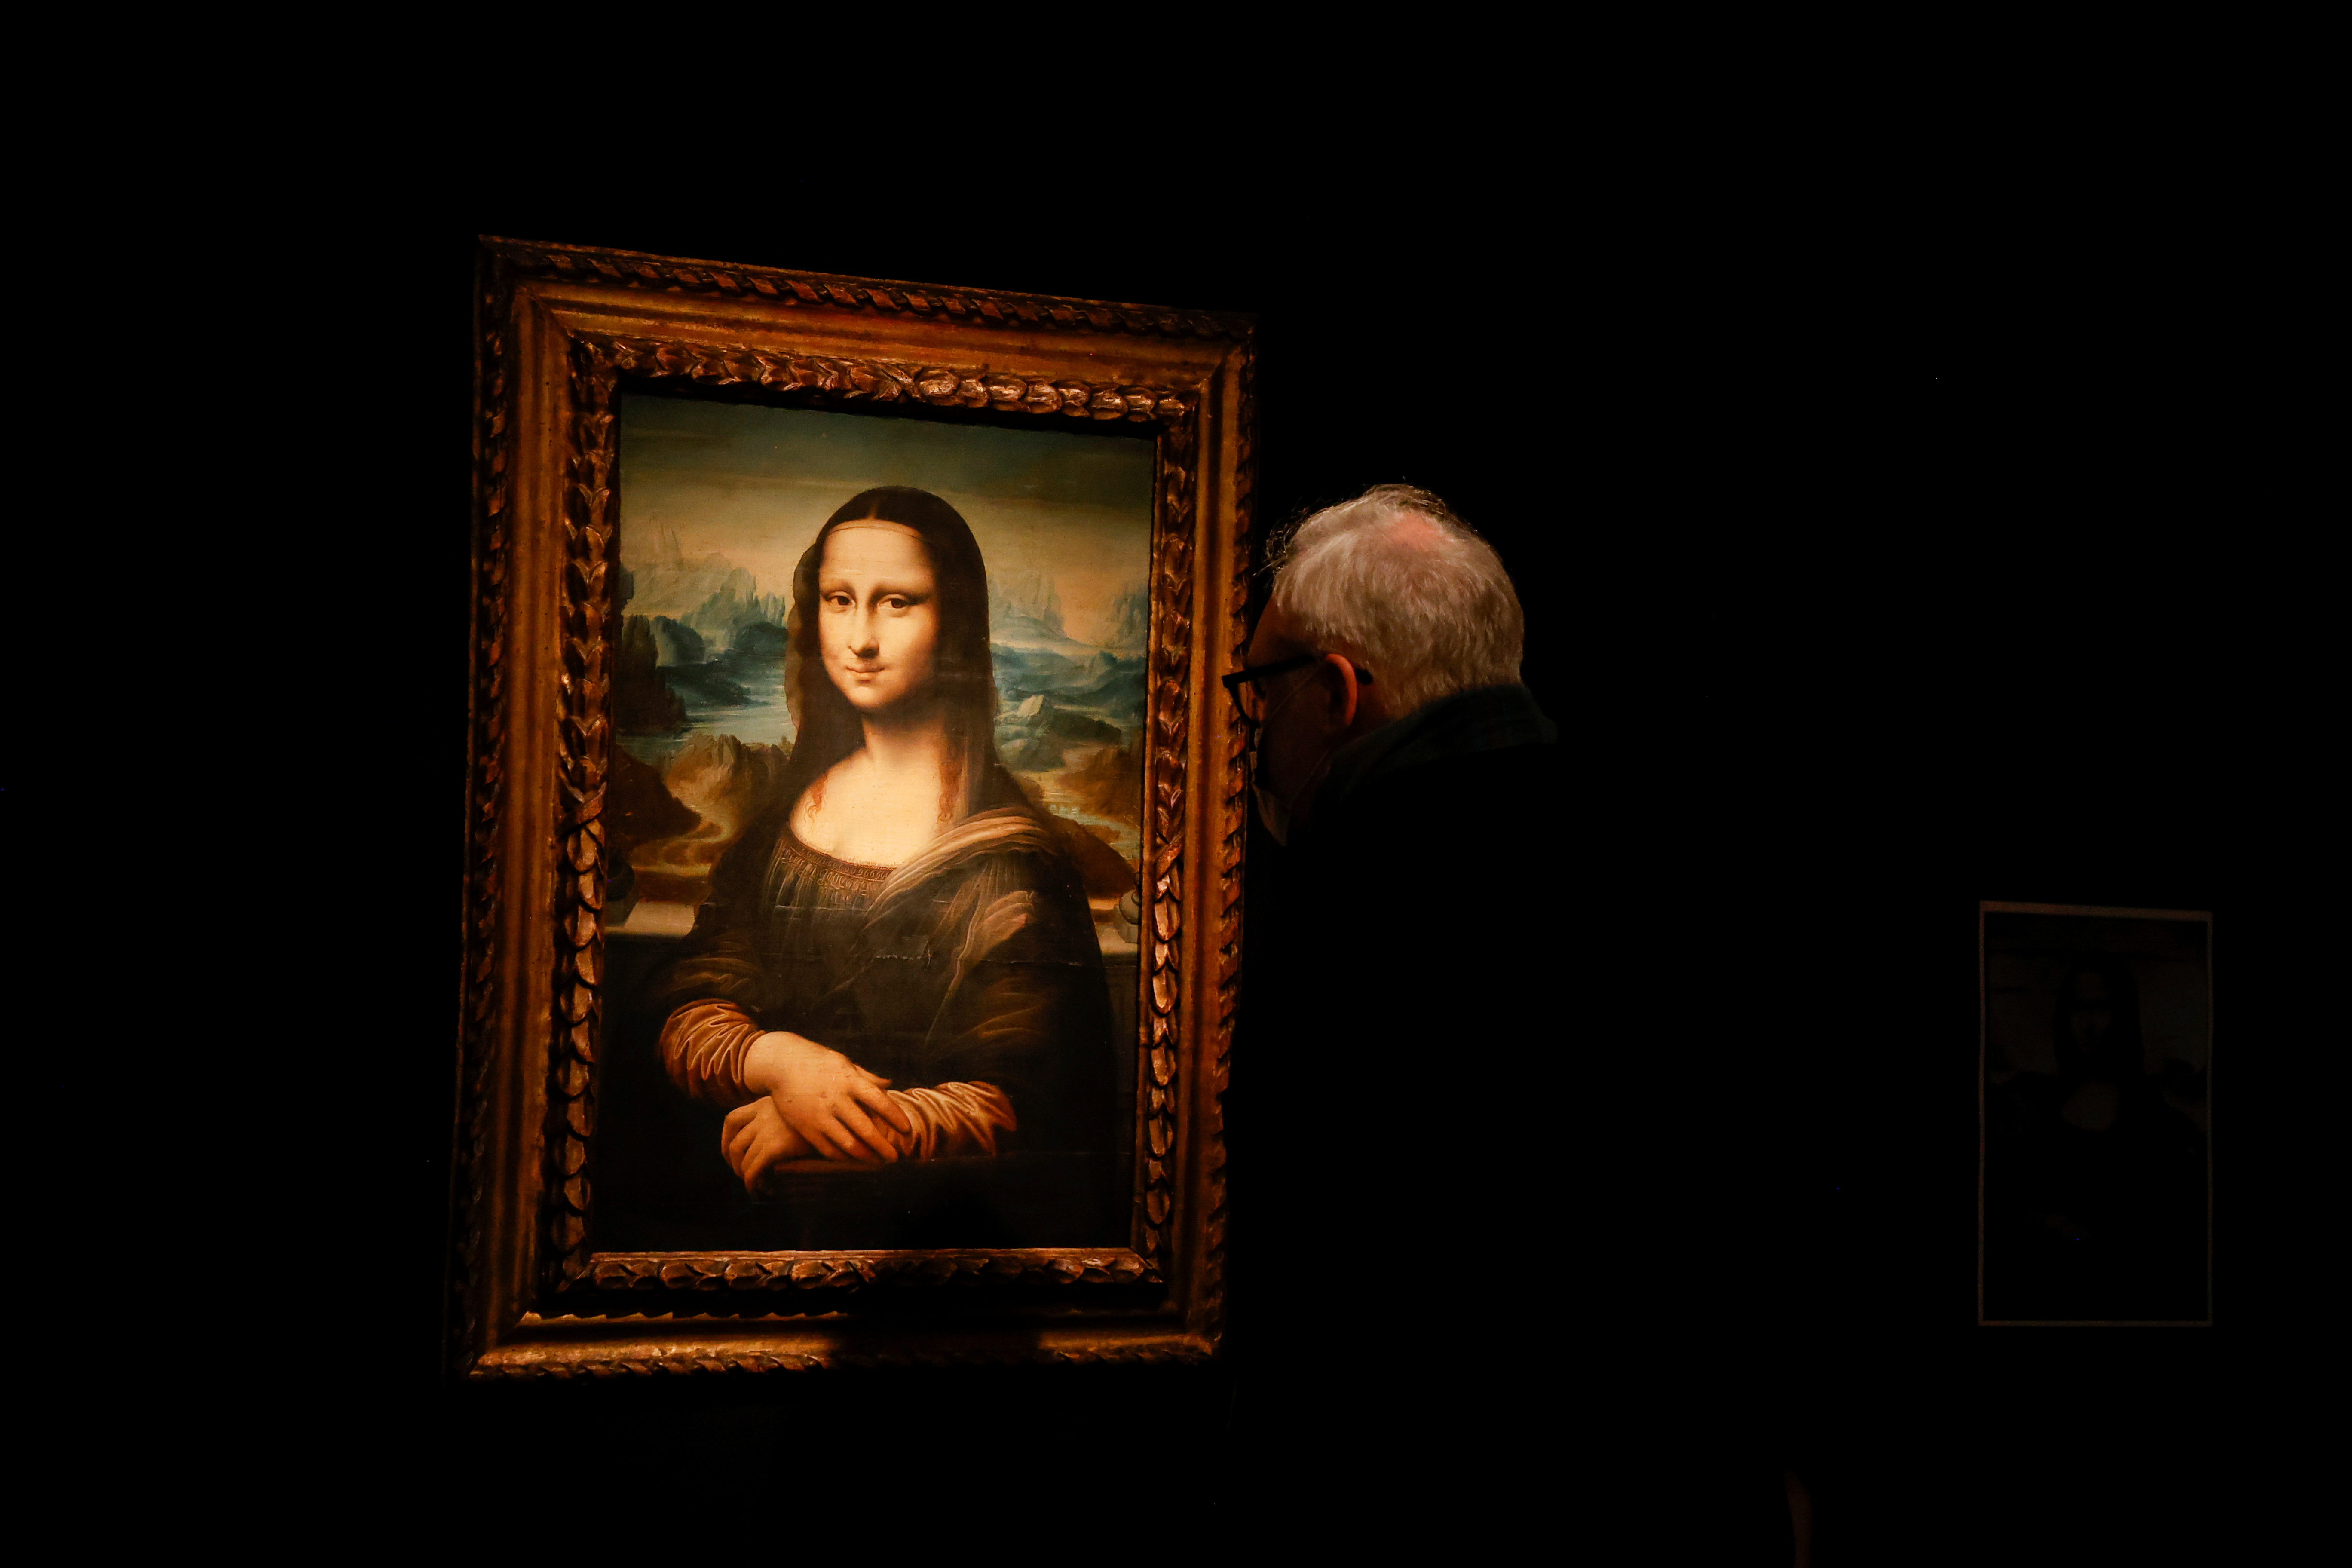 A visitor looks at a copy of the Leonardo da Vinci's Mona Lisa, which will go up for auction on November 9, at the Artcurial auction house in Paris